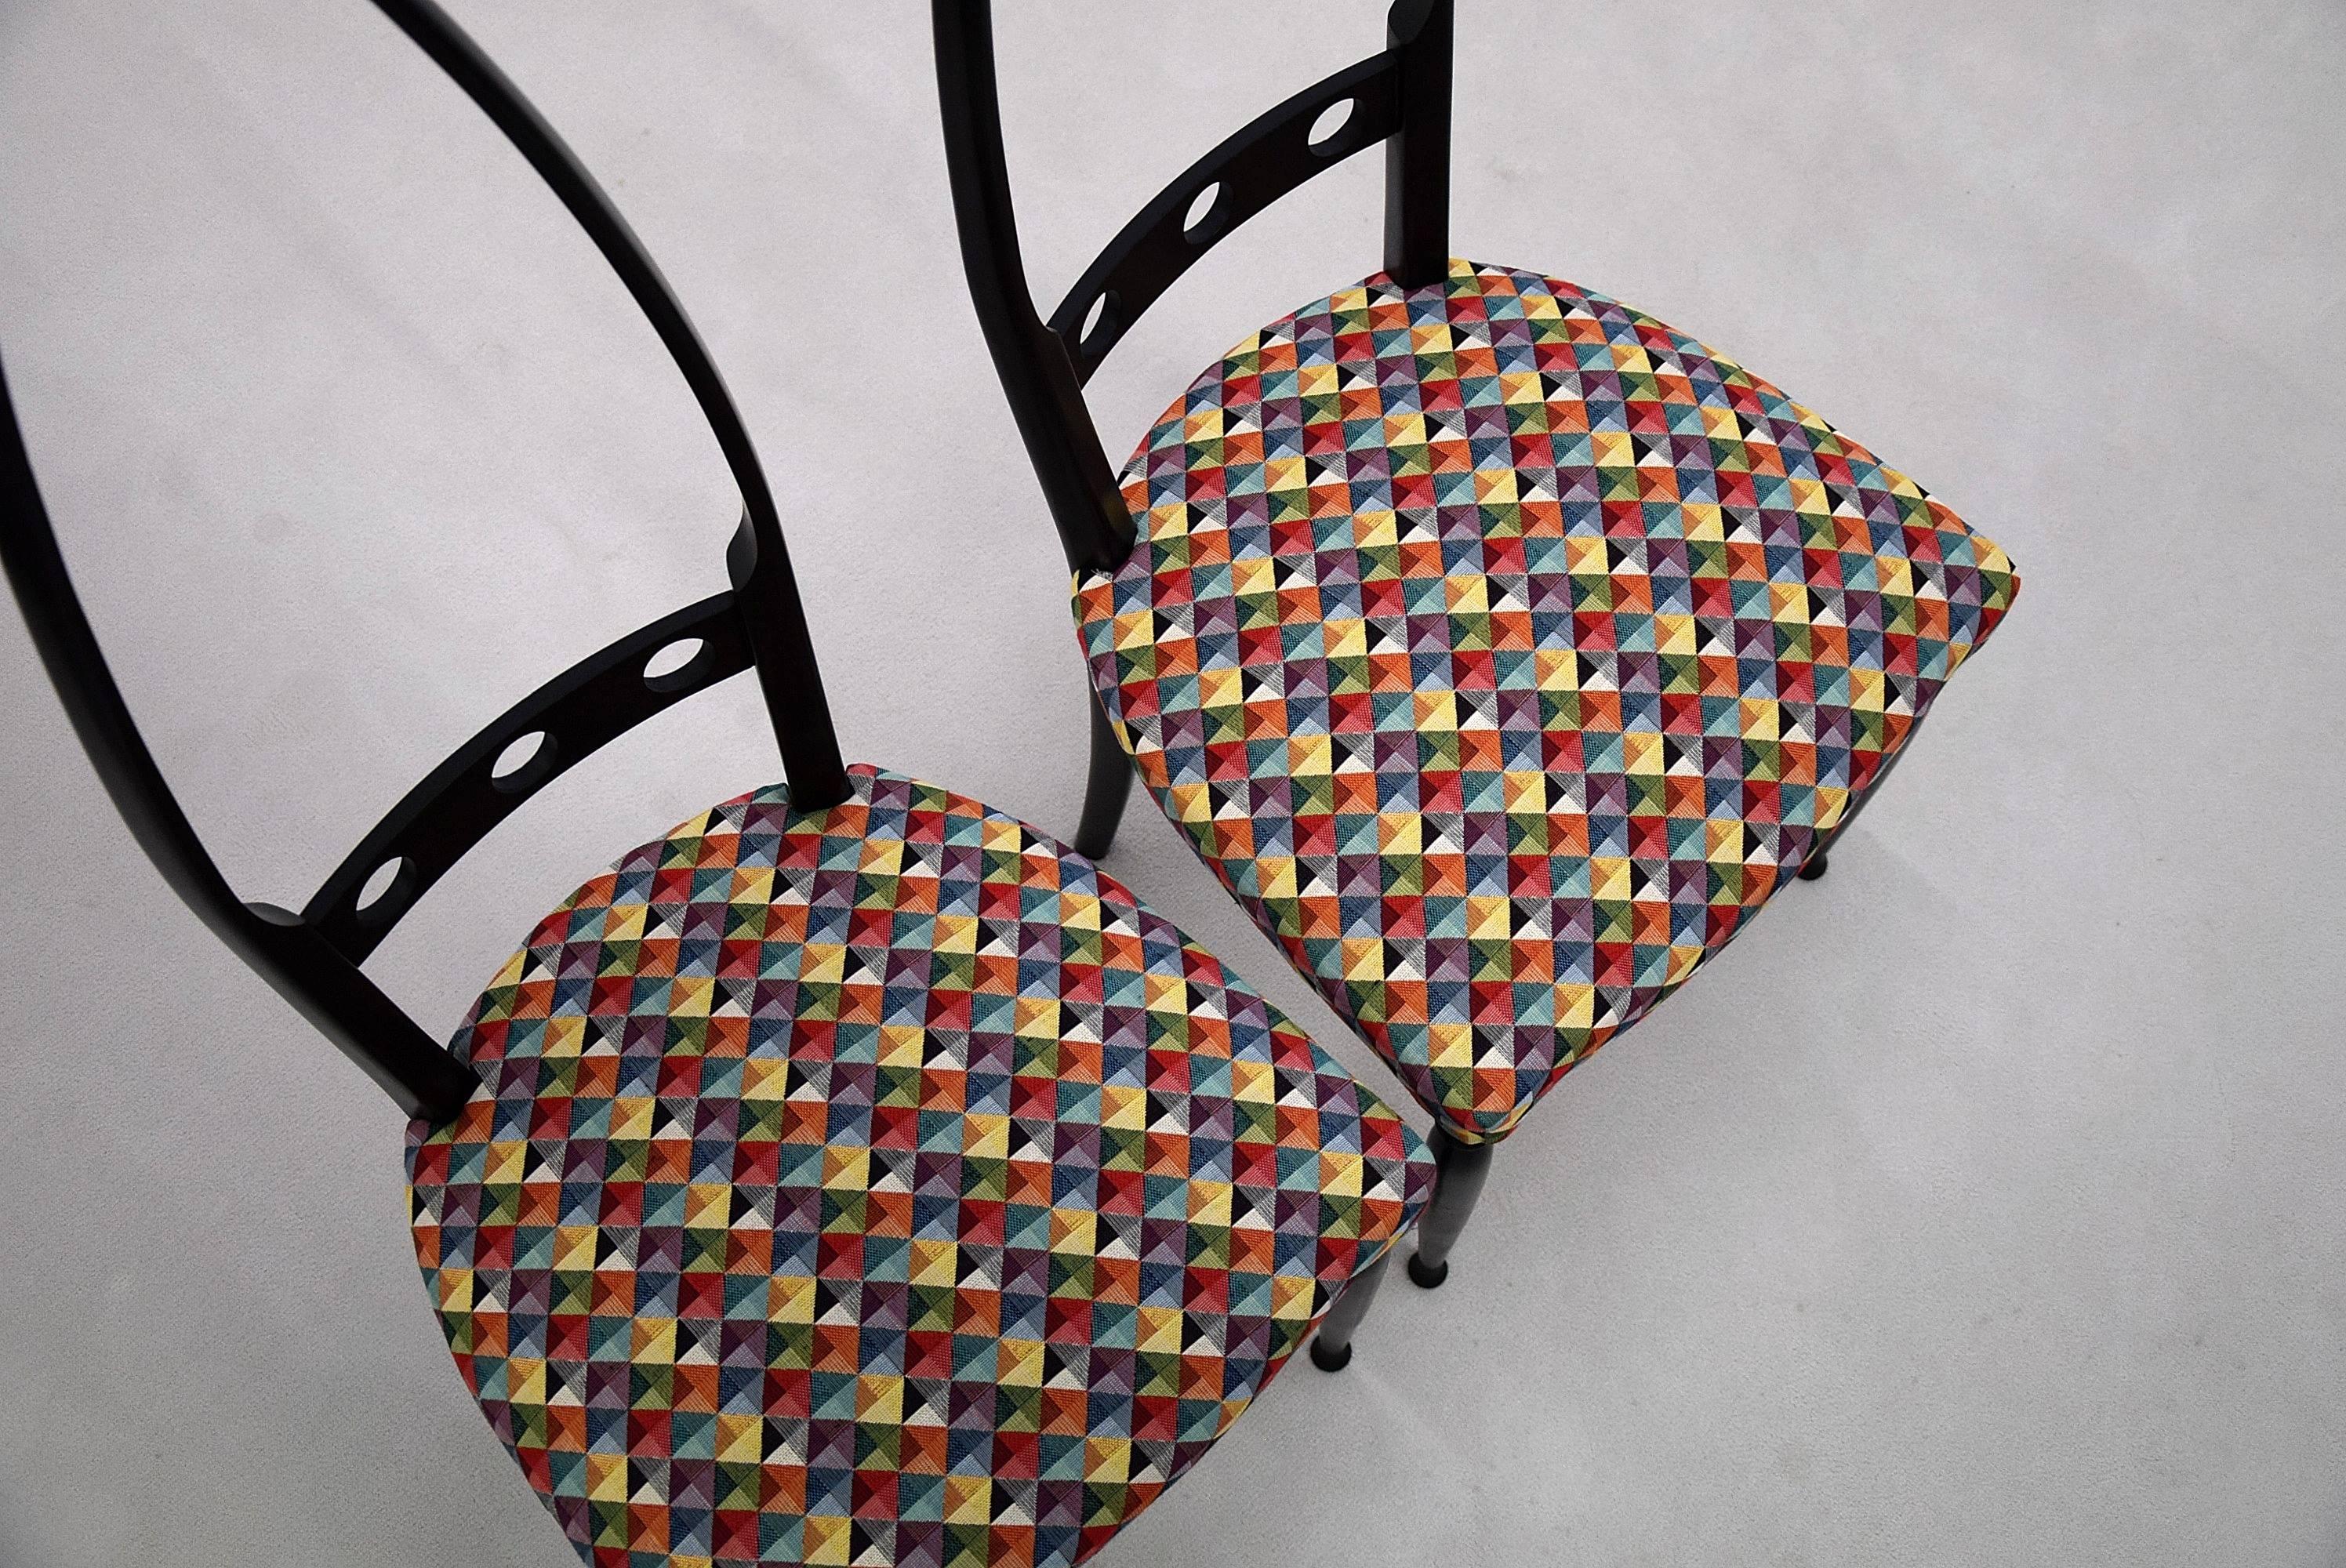 Pozzi and Verga Mid-Century Modern chairs.
Beautiful sculptural black lacquered mid-century chairs by Pozzi e Verga, Italy.
The chairs are in great condition and have been reupholstered in Italy by a true Artigiano with Missoni fabric which recalls